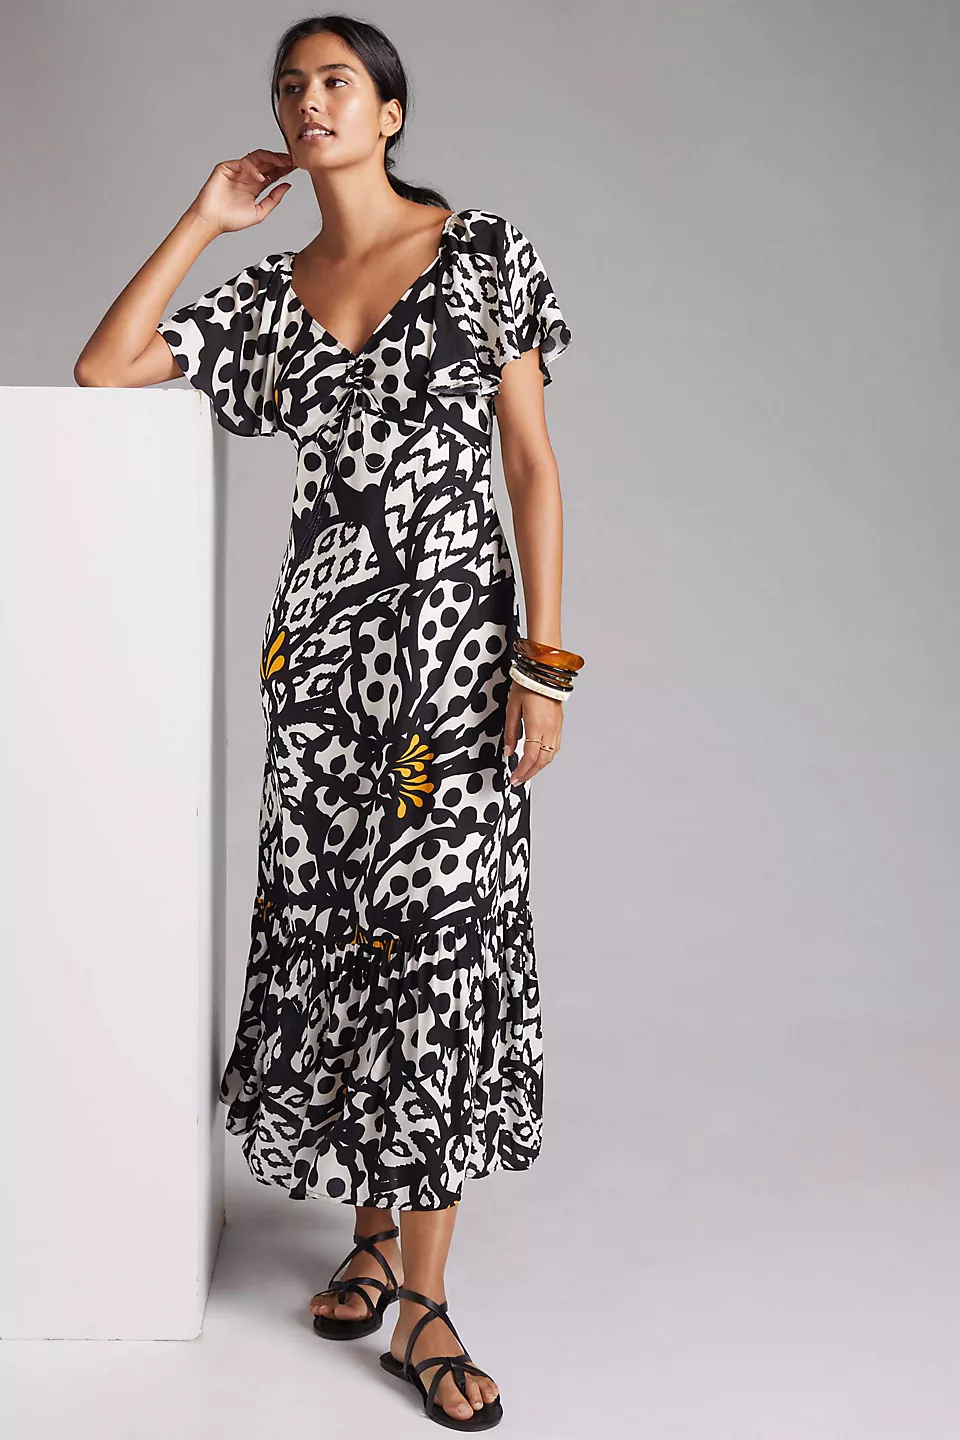 <h2>Farm Rio Flutter-Sleeved Maxi Dress</h2><strong><em>The Showstopper</em></strong><br><br>This stunner is easy, breezy, and quite beautiful. The fluttery sleeves, eye-catching print, and just-right silhouette seem to make this Farm Rio pick universally flattering.<br><br><strong>The Hype: </strong>4.7 out of 5 stars; 3 reviews on Anthropologie.com<br><br><strong>What They’re Saying</strong>: “I spotted this dress in store and had to have it once I tried it on! The fit is amazing and I love the fabric. As the previous reviewer says, it is sexy. It hugs the curves for sure. I couldn’t be happier!” — Bailey, Anthropologie reviewer <br><br><br><br><em>Shop <strong><a href="https://www.anthropologie.com/brands/farm-rio" rel="nofollow noopener" target="_blank" data-ylk="slk:Farm Rio" class="link ">Farm Rio</a></strong></em>  <br><br><strong>Farm Rio</strong> Flutter-Sleeved Maxi Dress, $, available at <a href="https://go.skimresources.com/?id=30283X879131&url=https%3A%2F%2Fwww.anthropologie.com%2Fshop%2Ffarm-rio-flutter-sleeved-maxi-dress" rel="nofollow noopener" target="_blank" data-ylk="slk:Anthropologie" class="link ">Anthropologie</a>